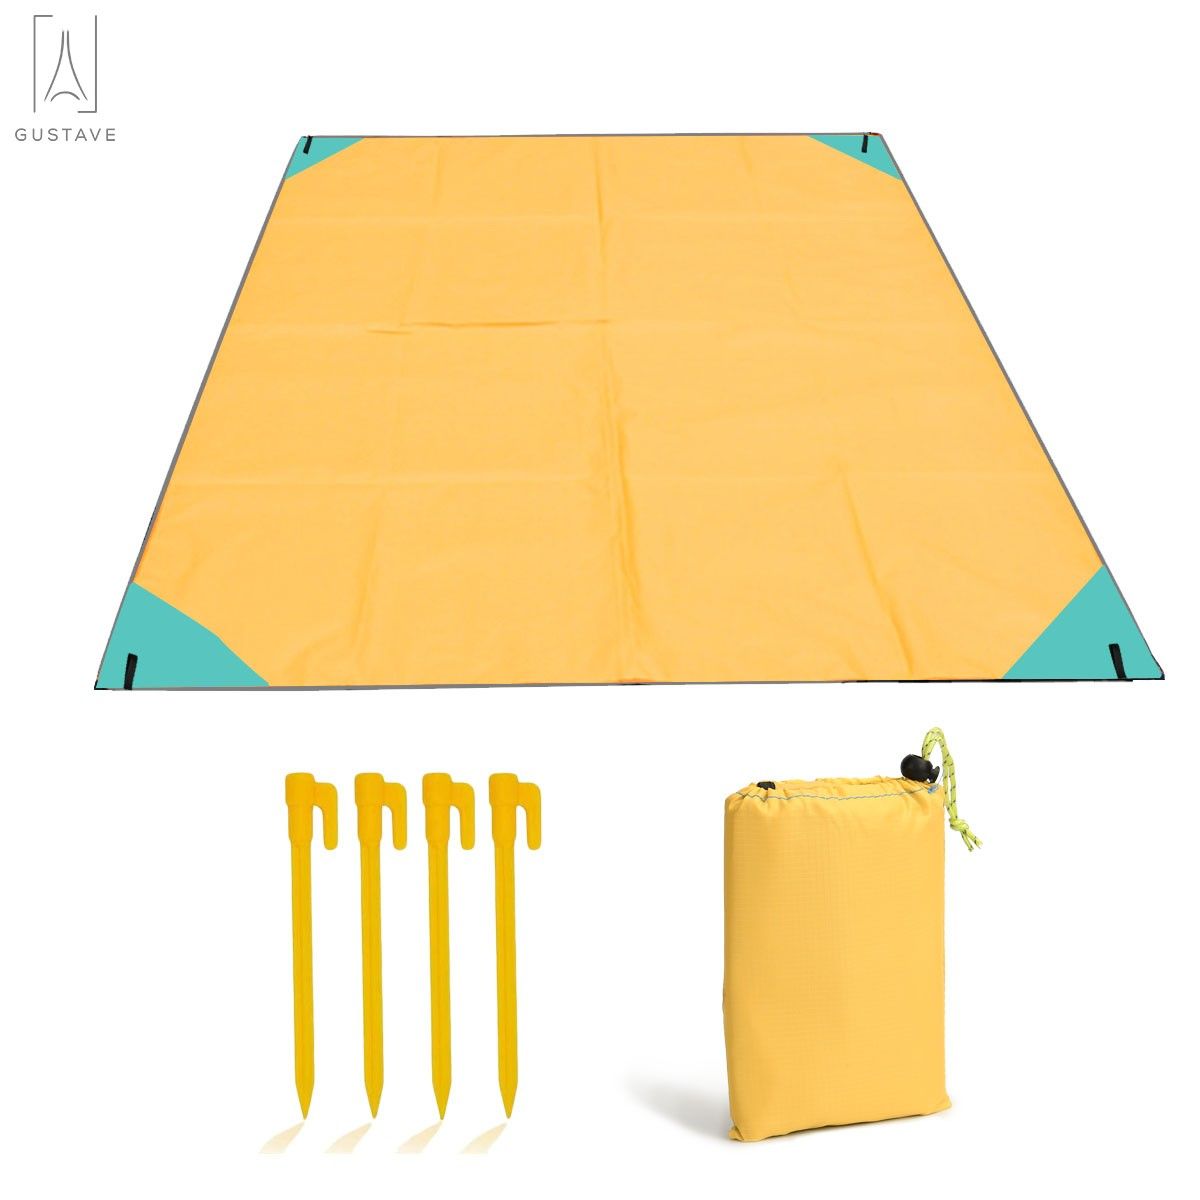 Gustave Beach Blanket Picnic Mat Camping Ground Mat Mattress Outdoor Blanket Waterproof Sandproof Beach Mat Portable Picnic Blanket with 4 Stakes & Carry Bag "Yellow" - image 3 of 9